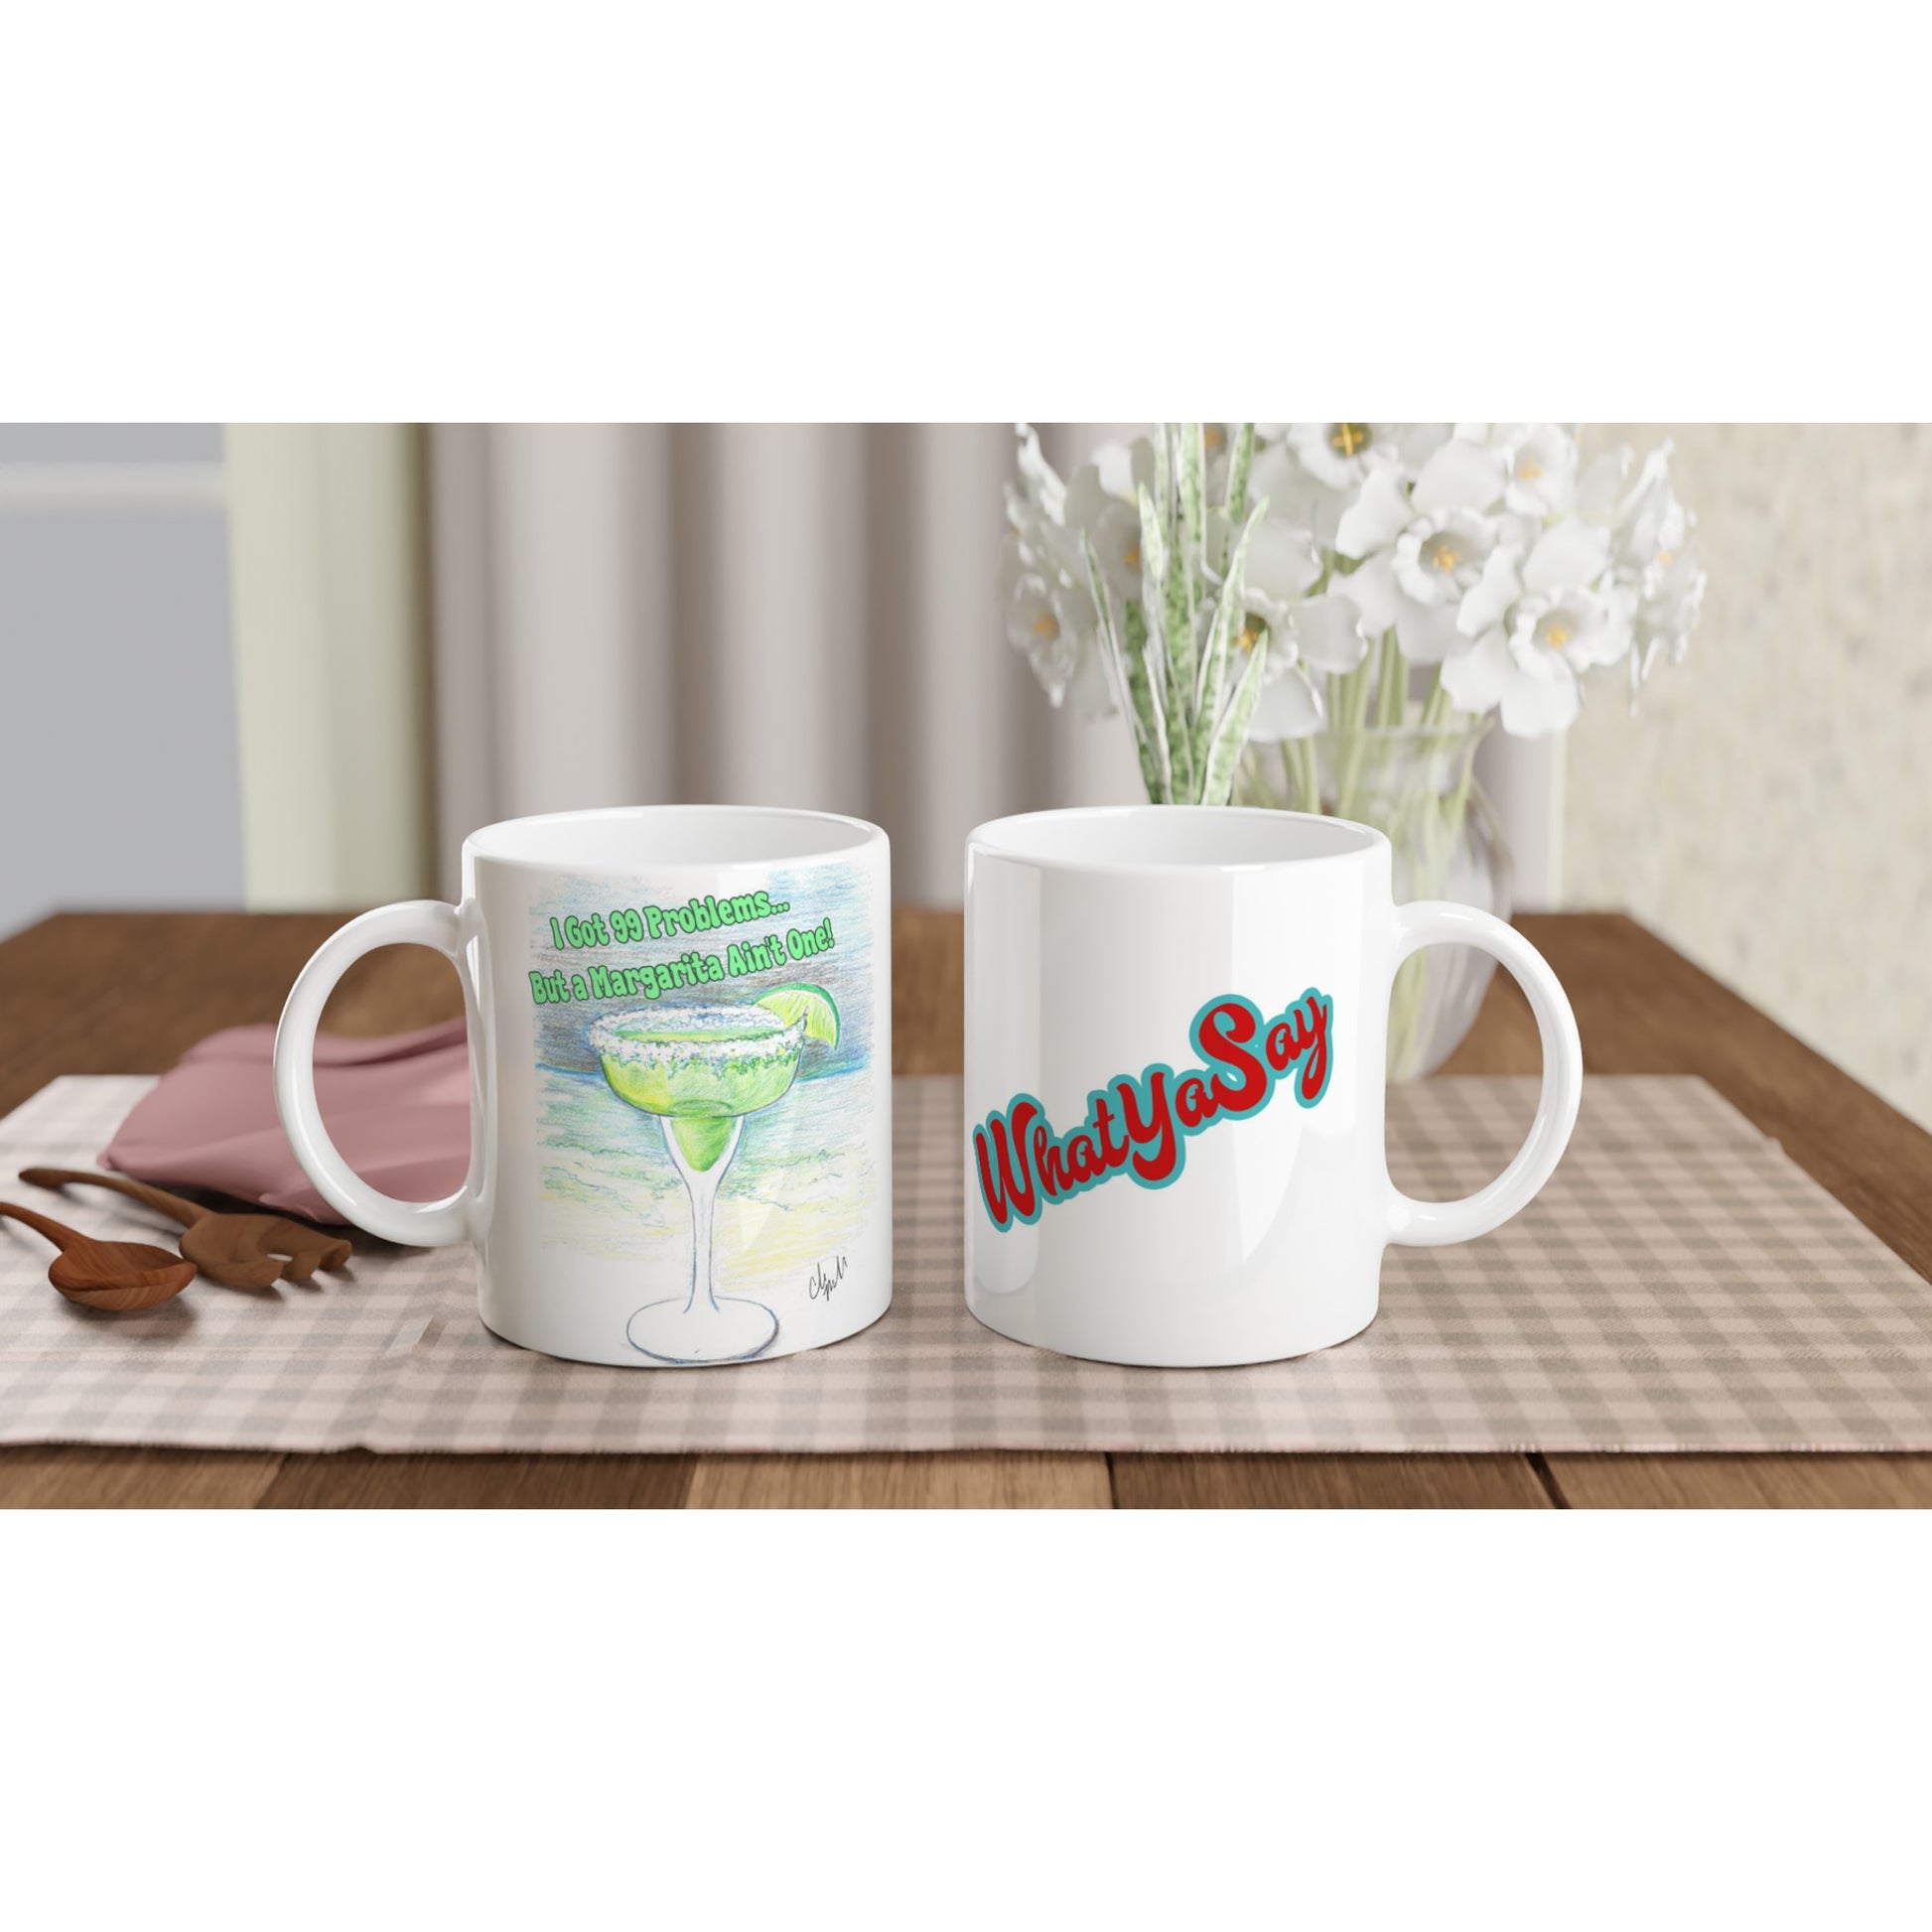 Two white ceramic 11oz mugs with motto I Got 99 Problems But a Margarita Aint One on front and WhatYa Say logo on back coffee mugs are dishwasher and microwave safe from WhatYa Say Apparel sitting on coffee table with green and white placemat.